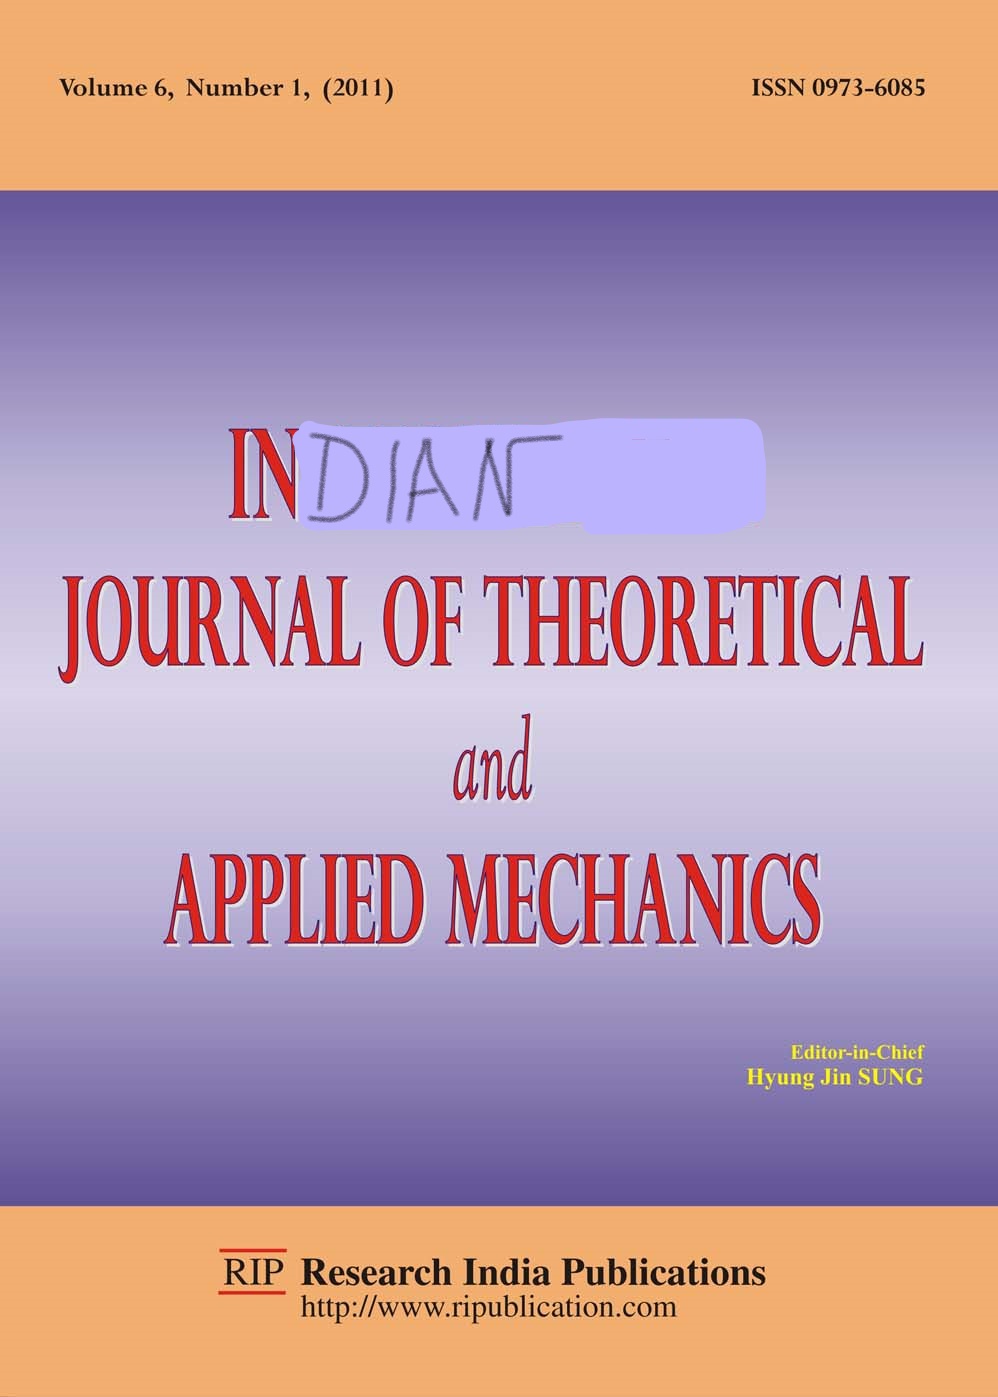 Indian Journal of Theoretical and Applied Mechanics